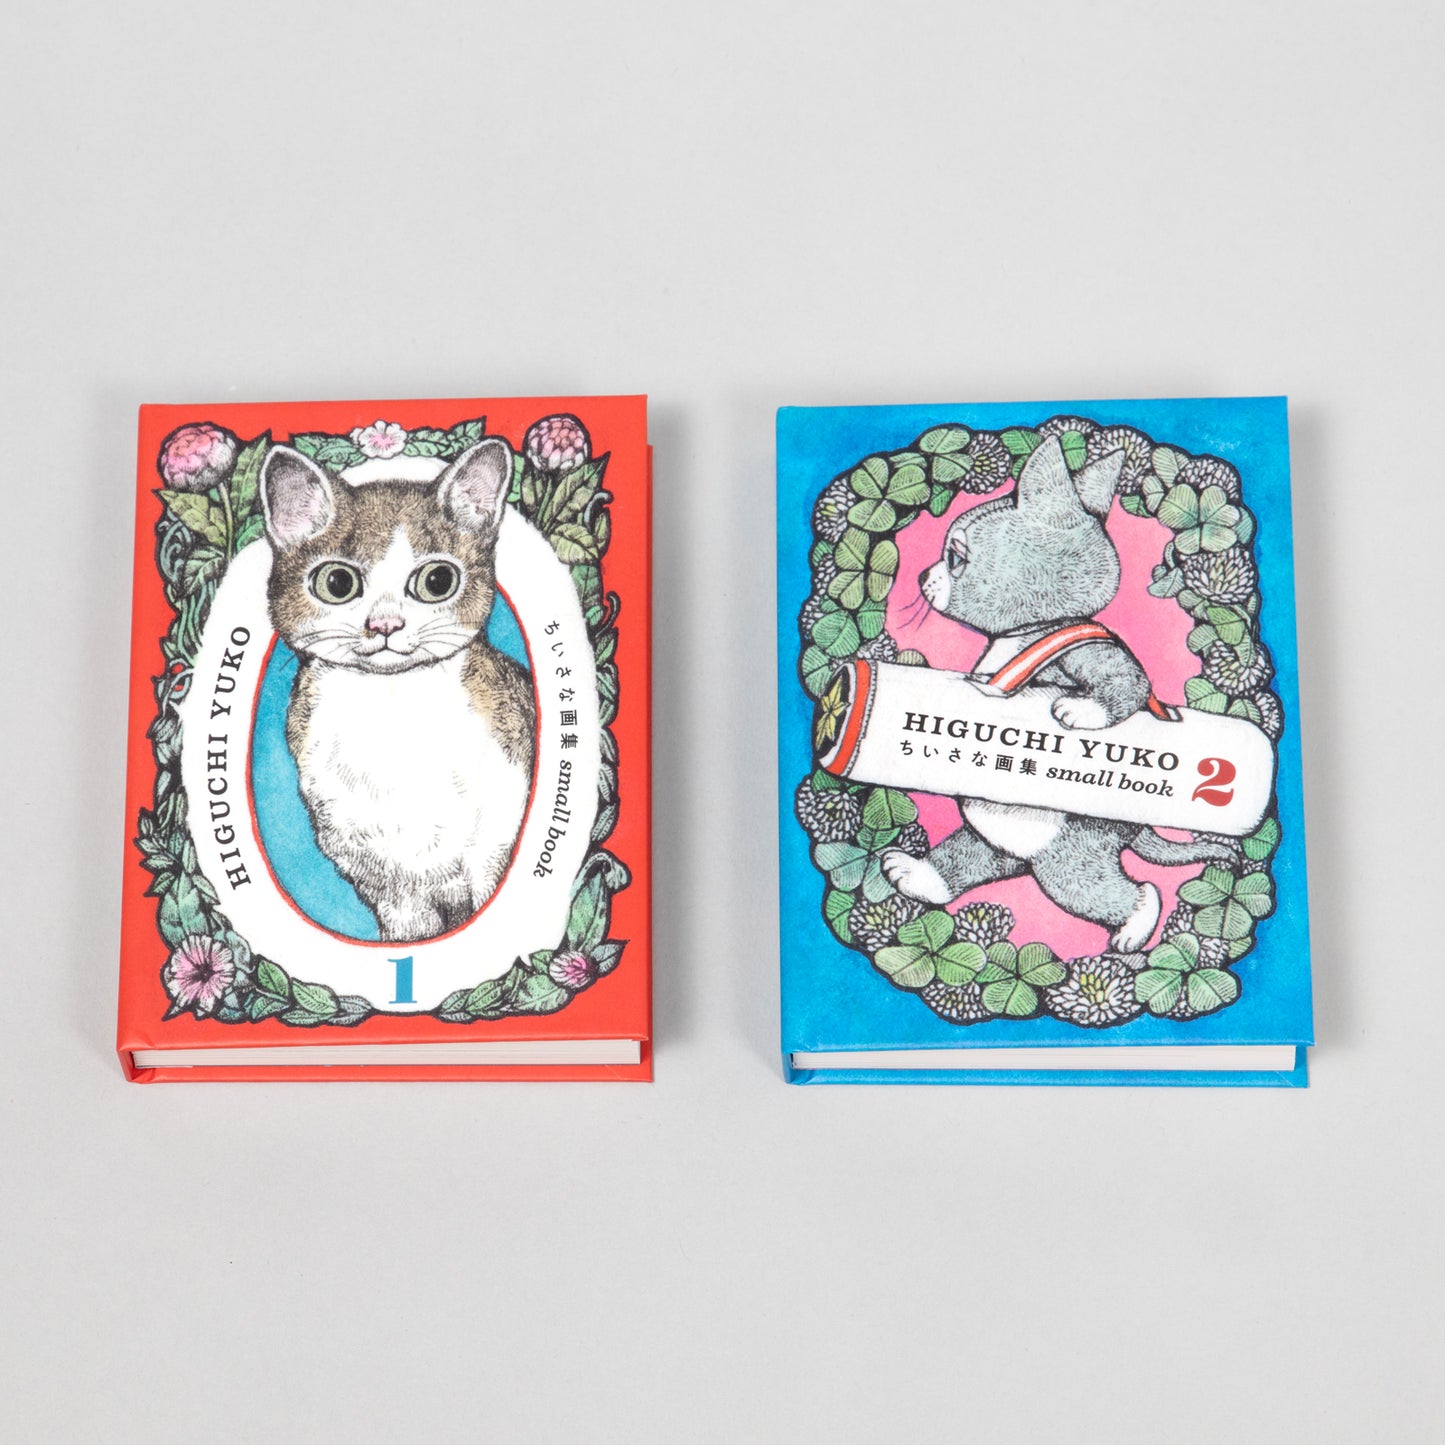 Small Book 1 & 2 set (A)